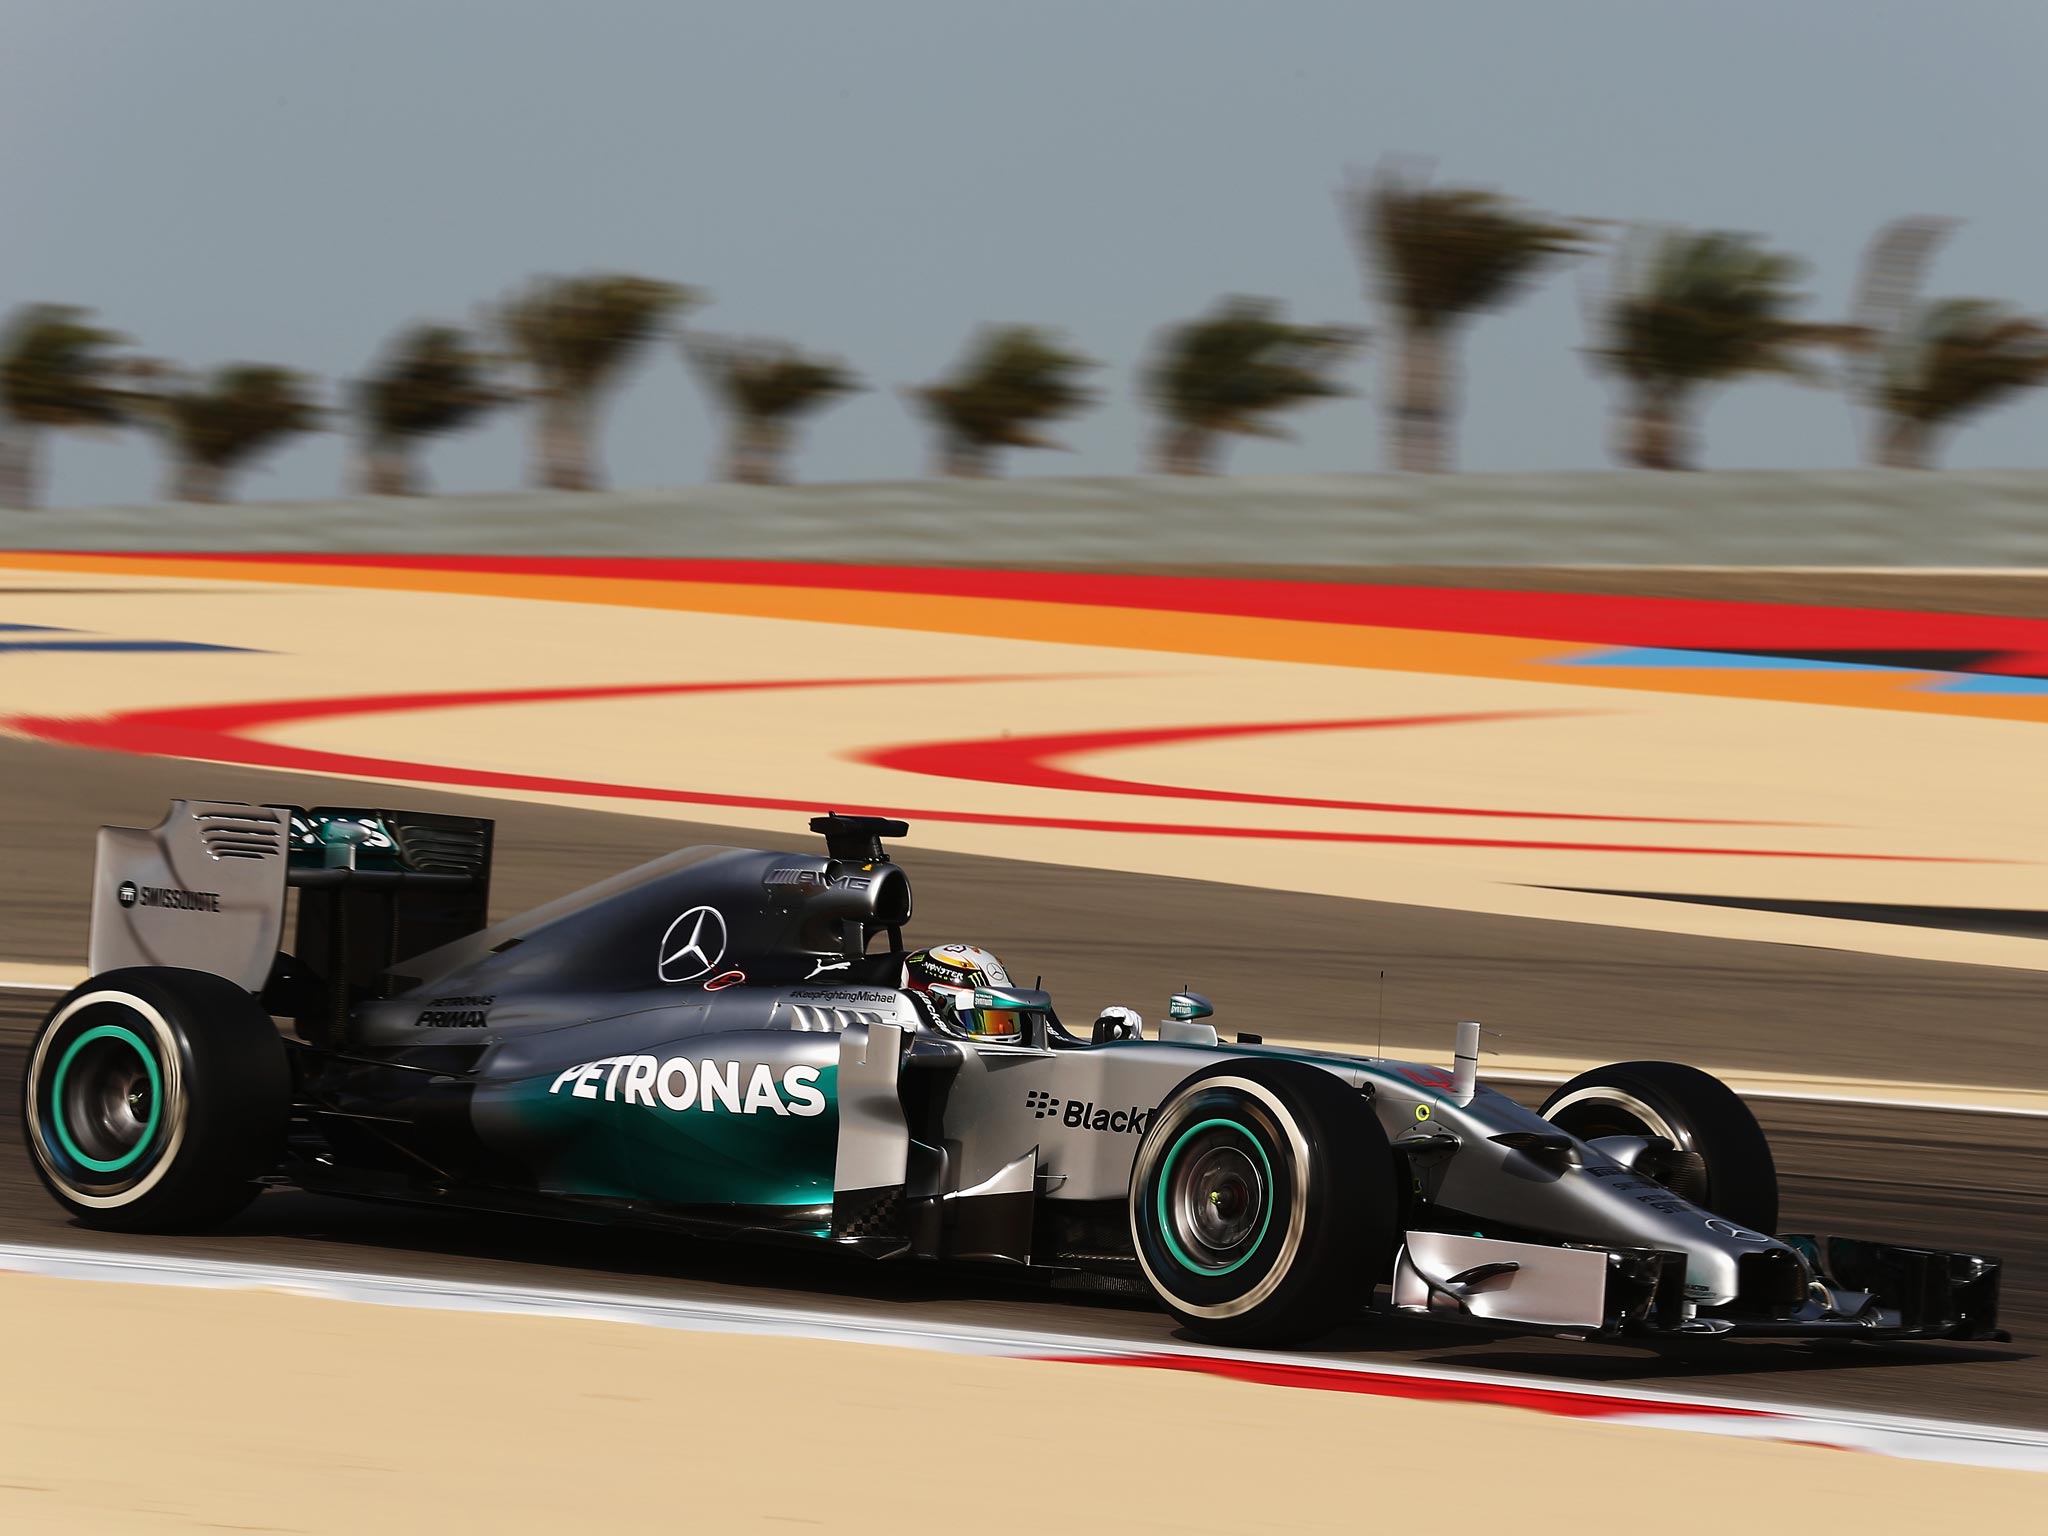 Lewis Hamilton finished the first practice in Bahrain on top